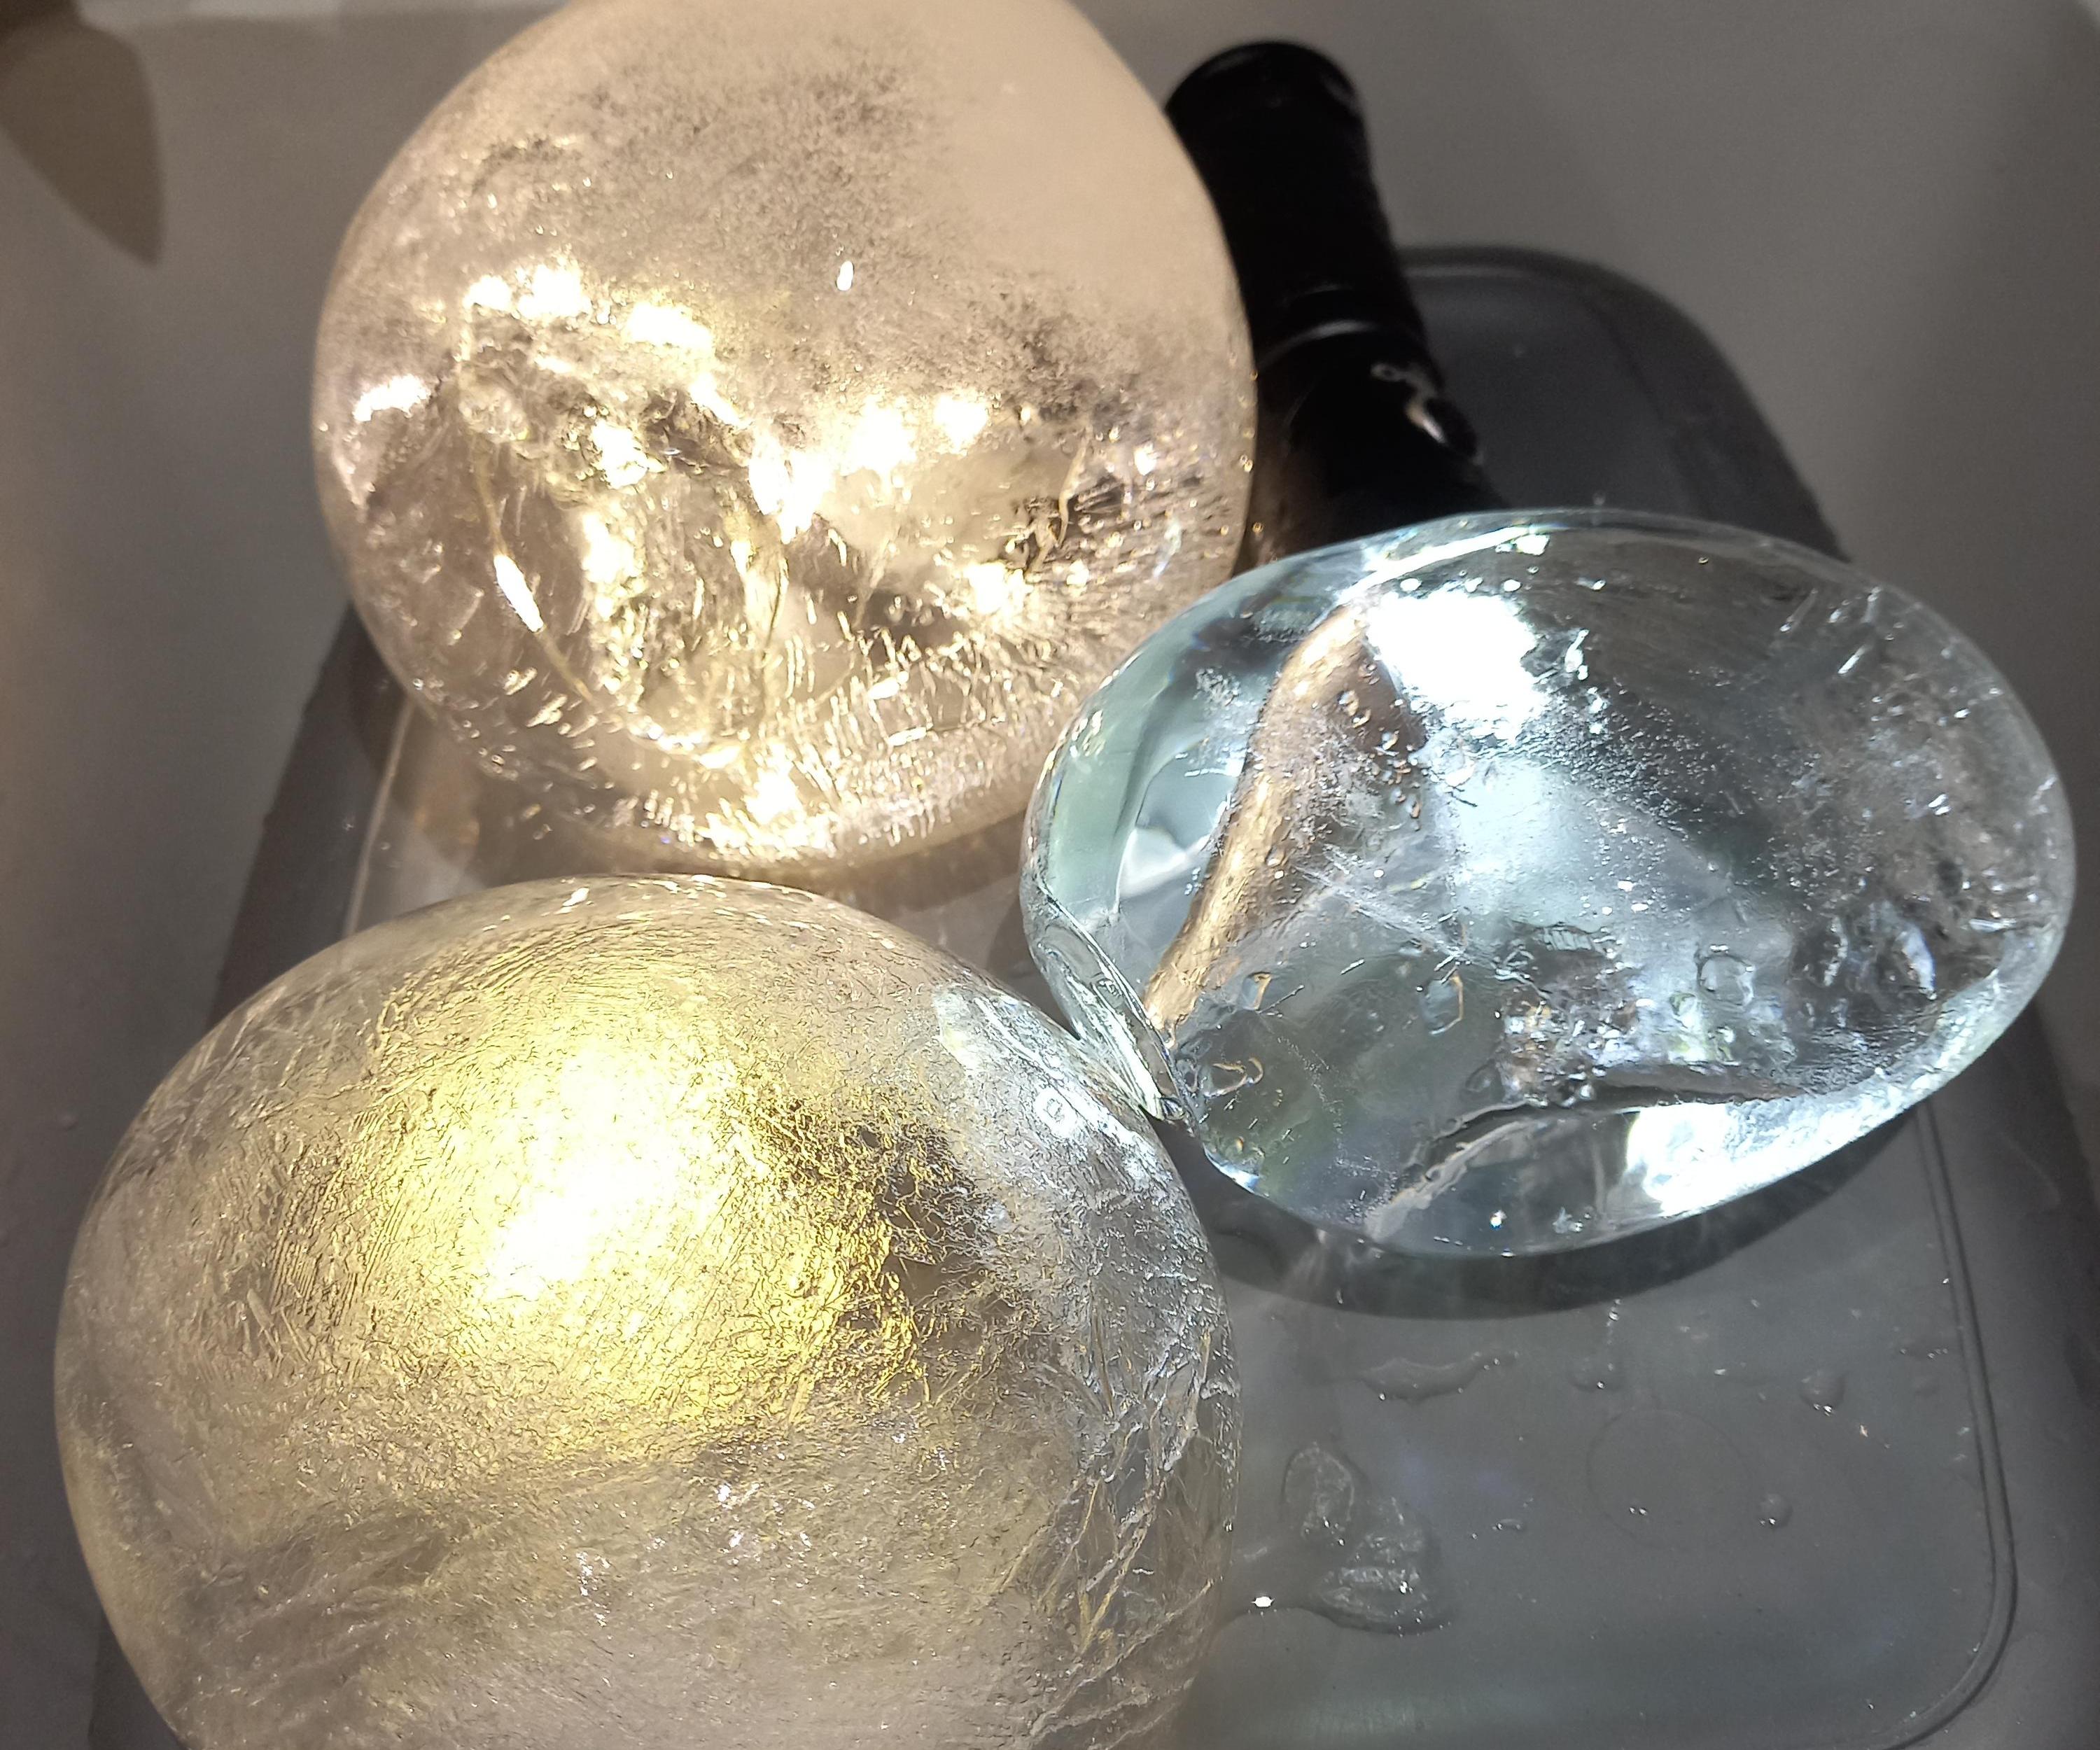 Hollow Ice Balls With Lights Inside - Outdoors or Indoors - Science, Art and Fun!